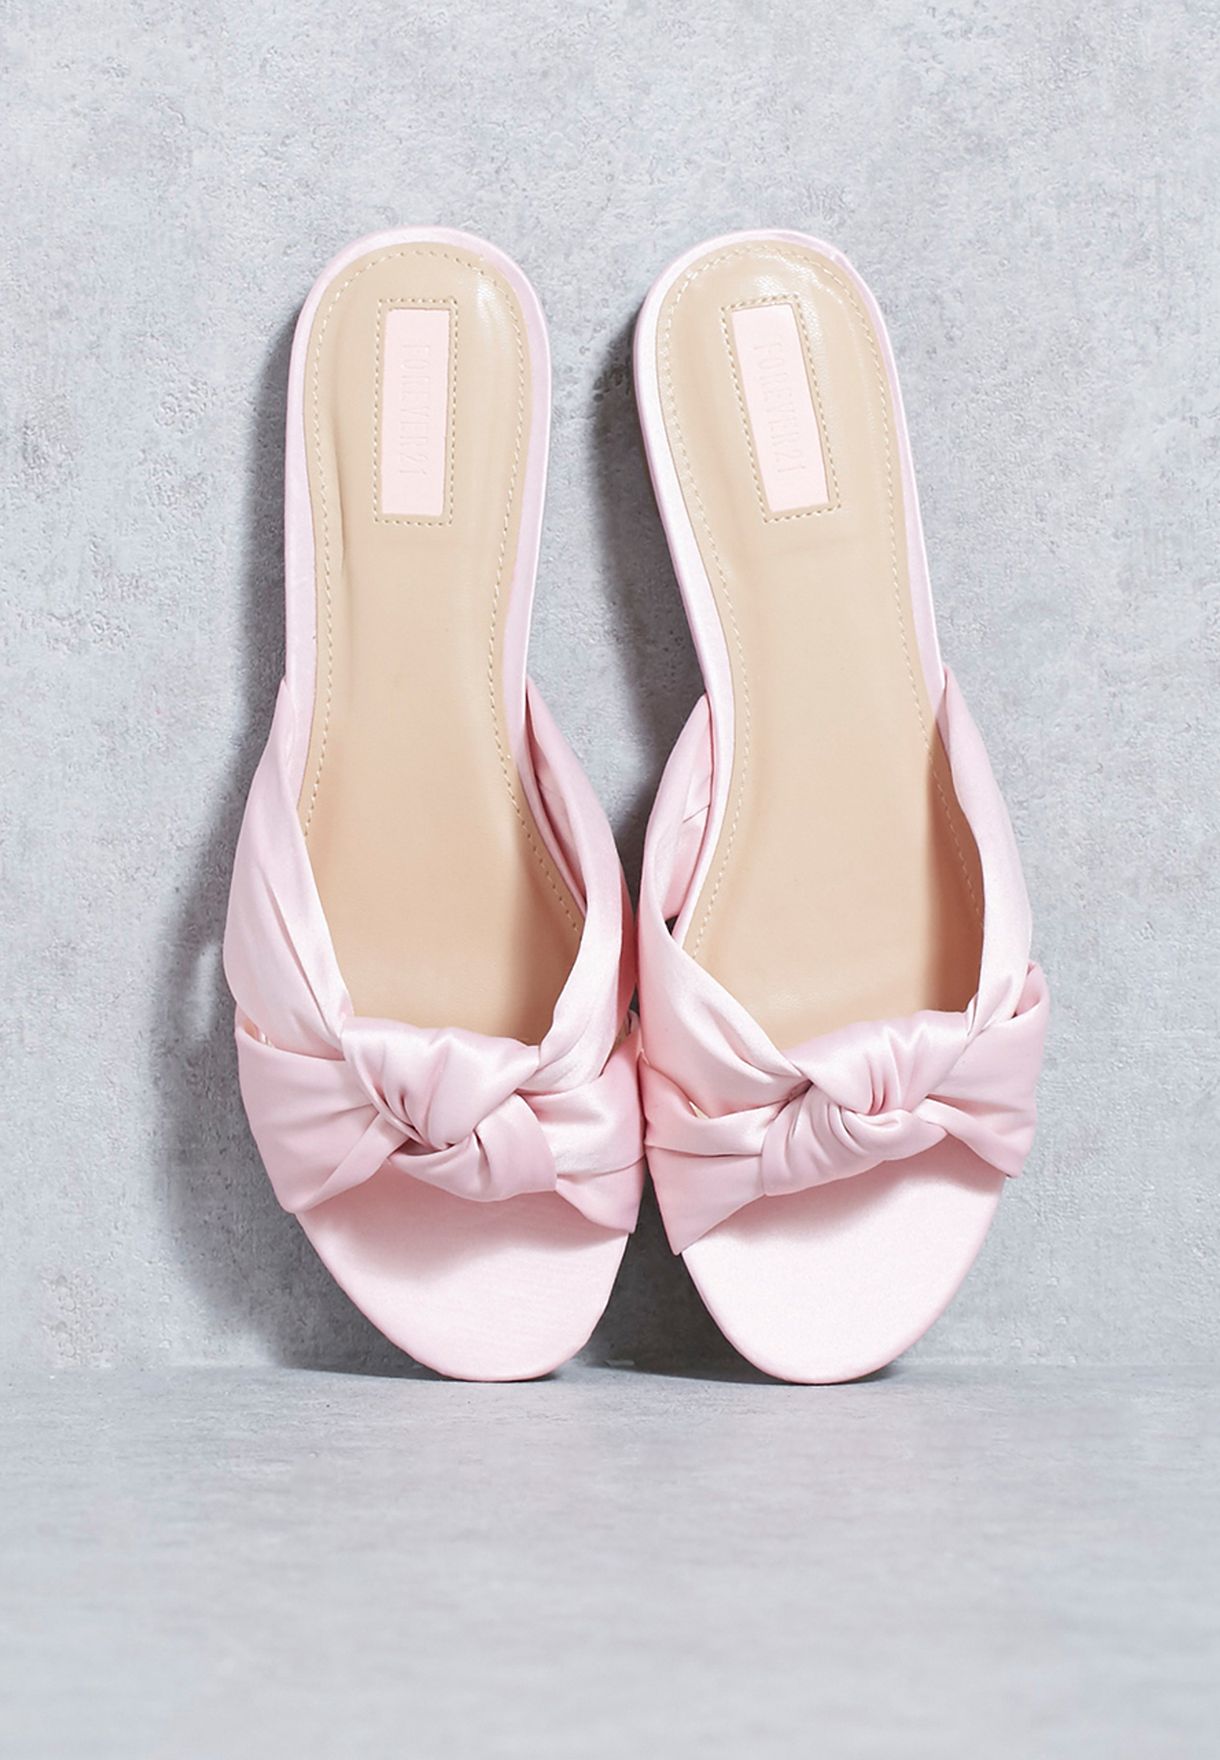 forever 21 shoes flats cheap online